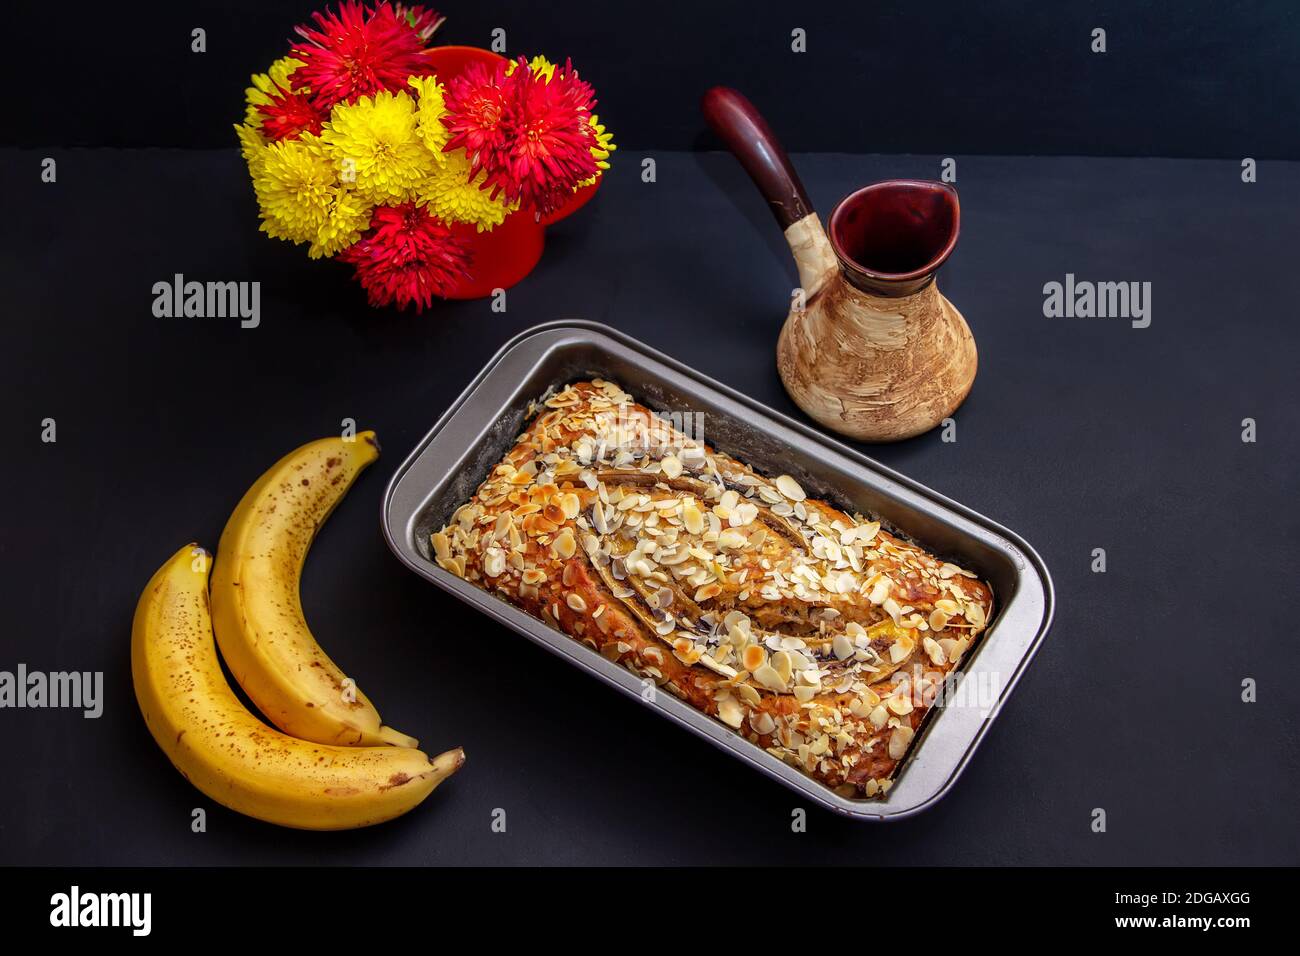 Homemade banana bread with almonds in baking tin, ripe bananas and beautiful colorful flowers on black background Stock Photo